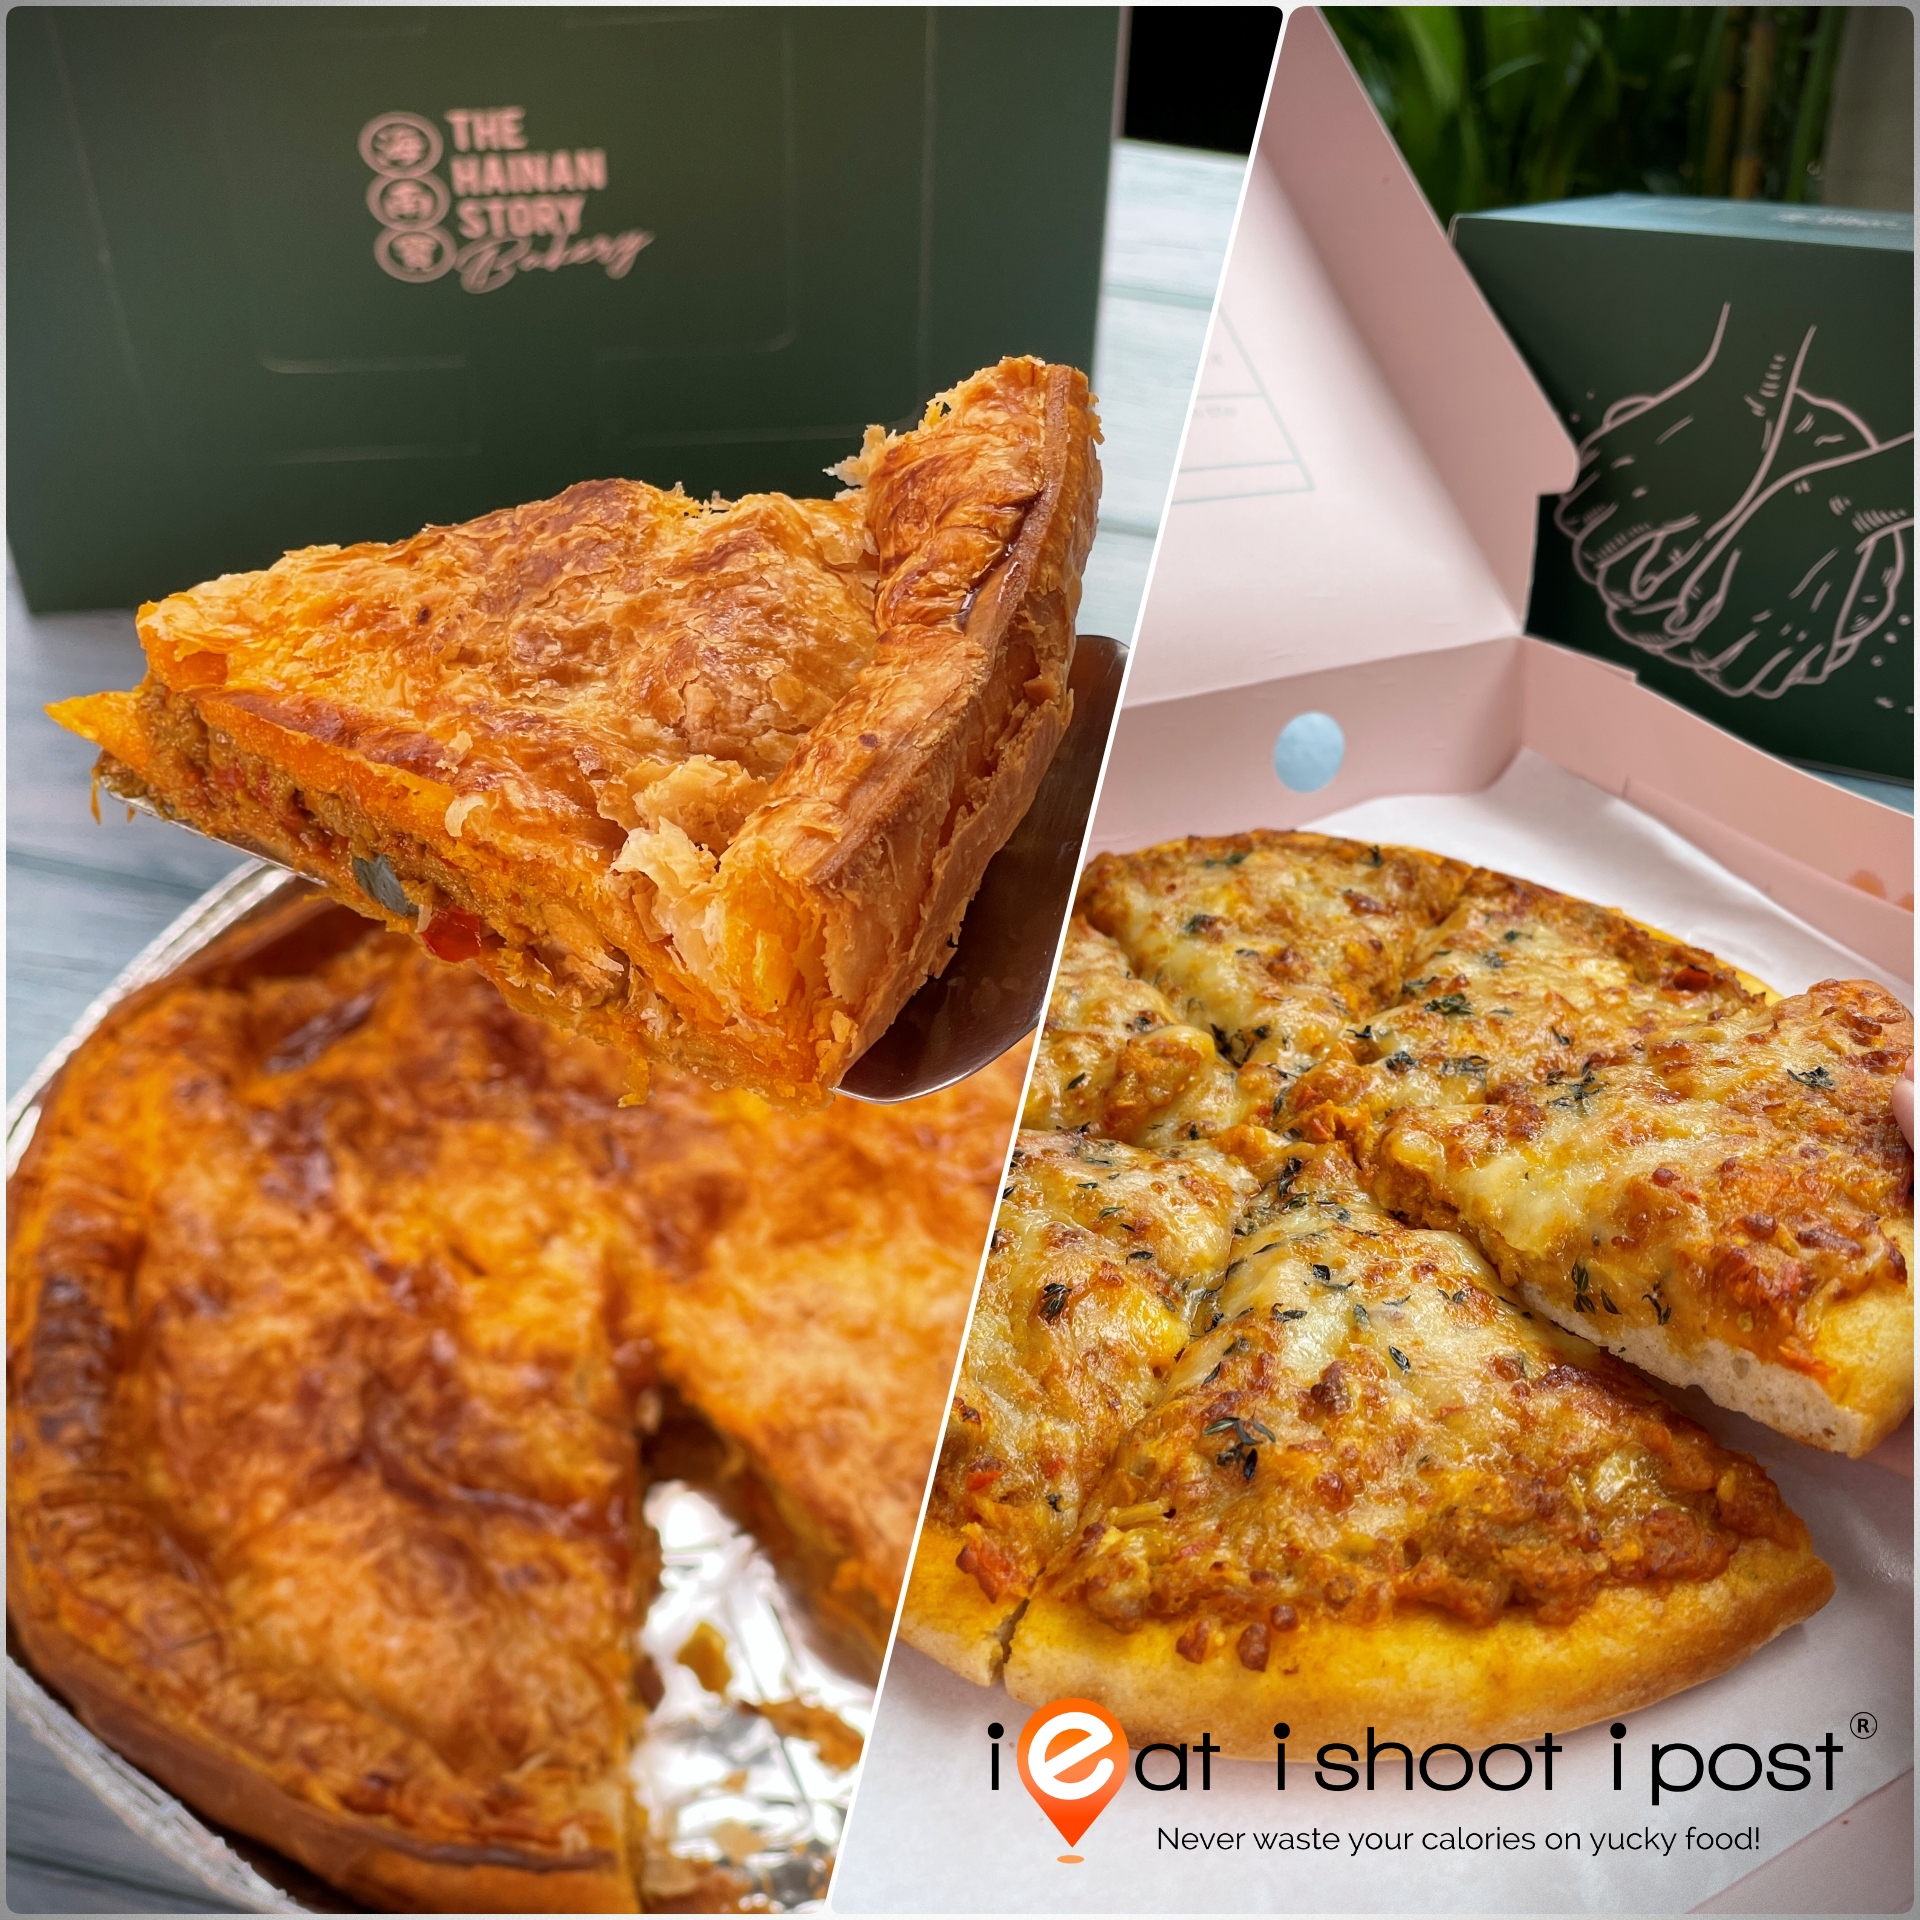 Buttered Crust Hainanese Mega Curry Chicken Pie $24.90 and Hainanese Curry Chicken Sourdough Pizza $24.80